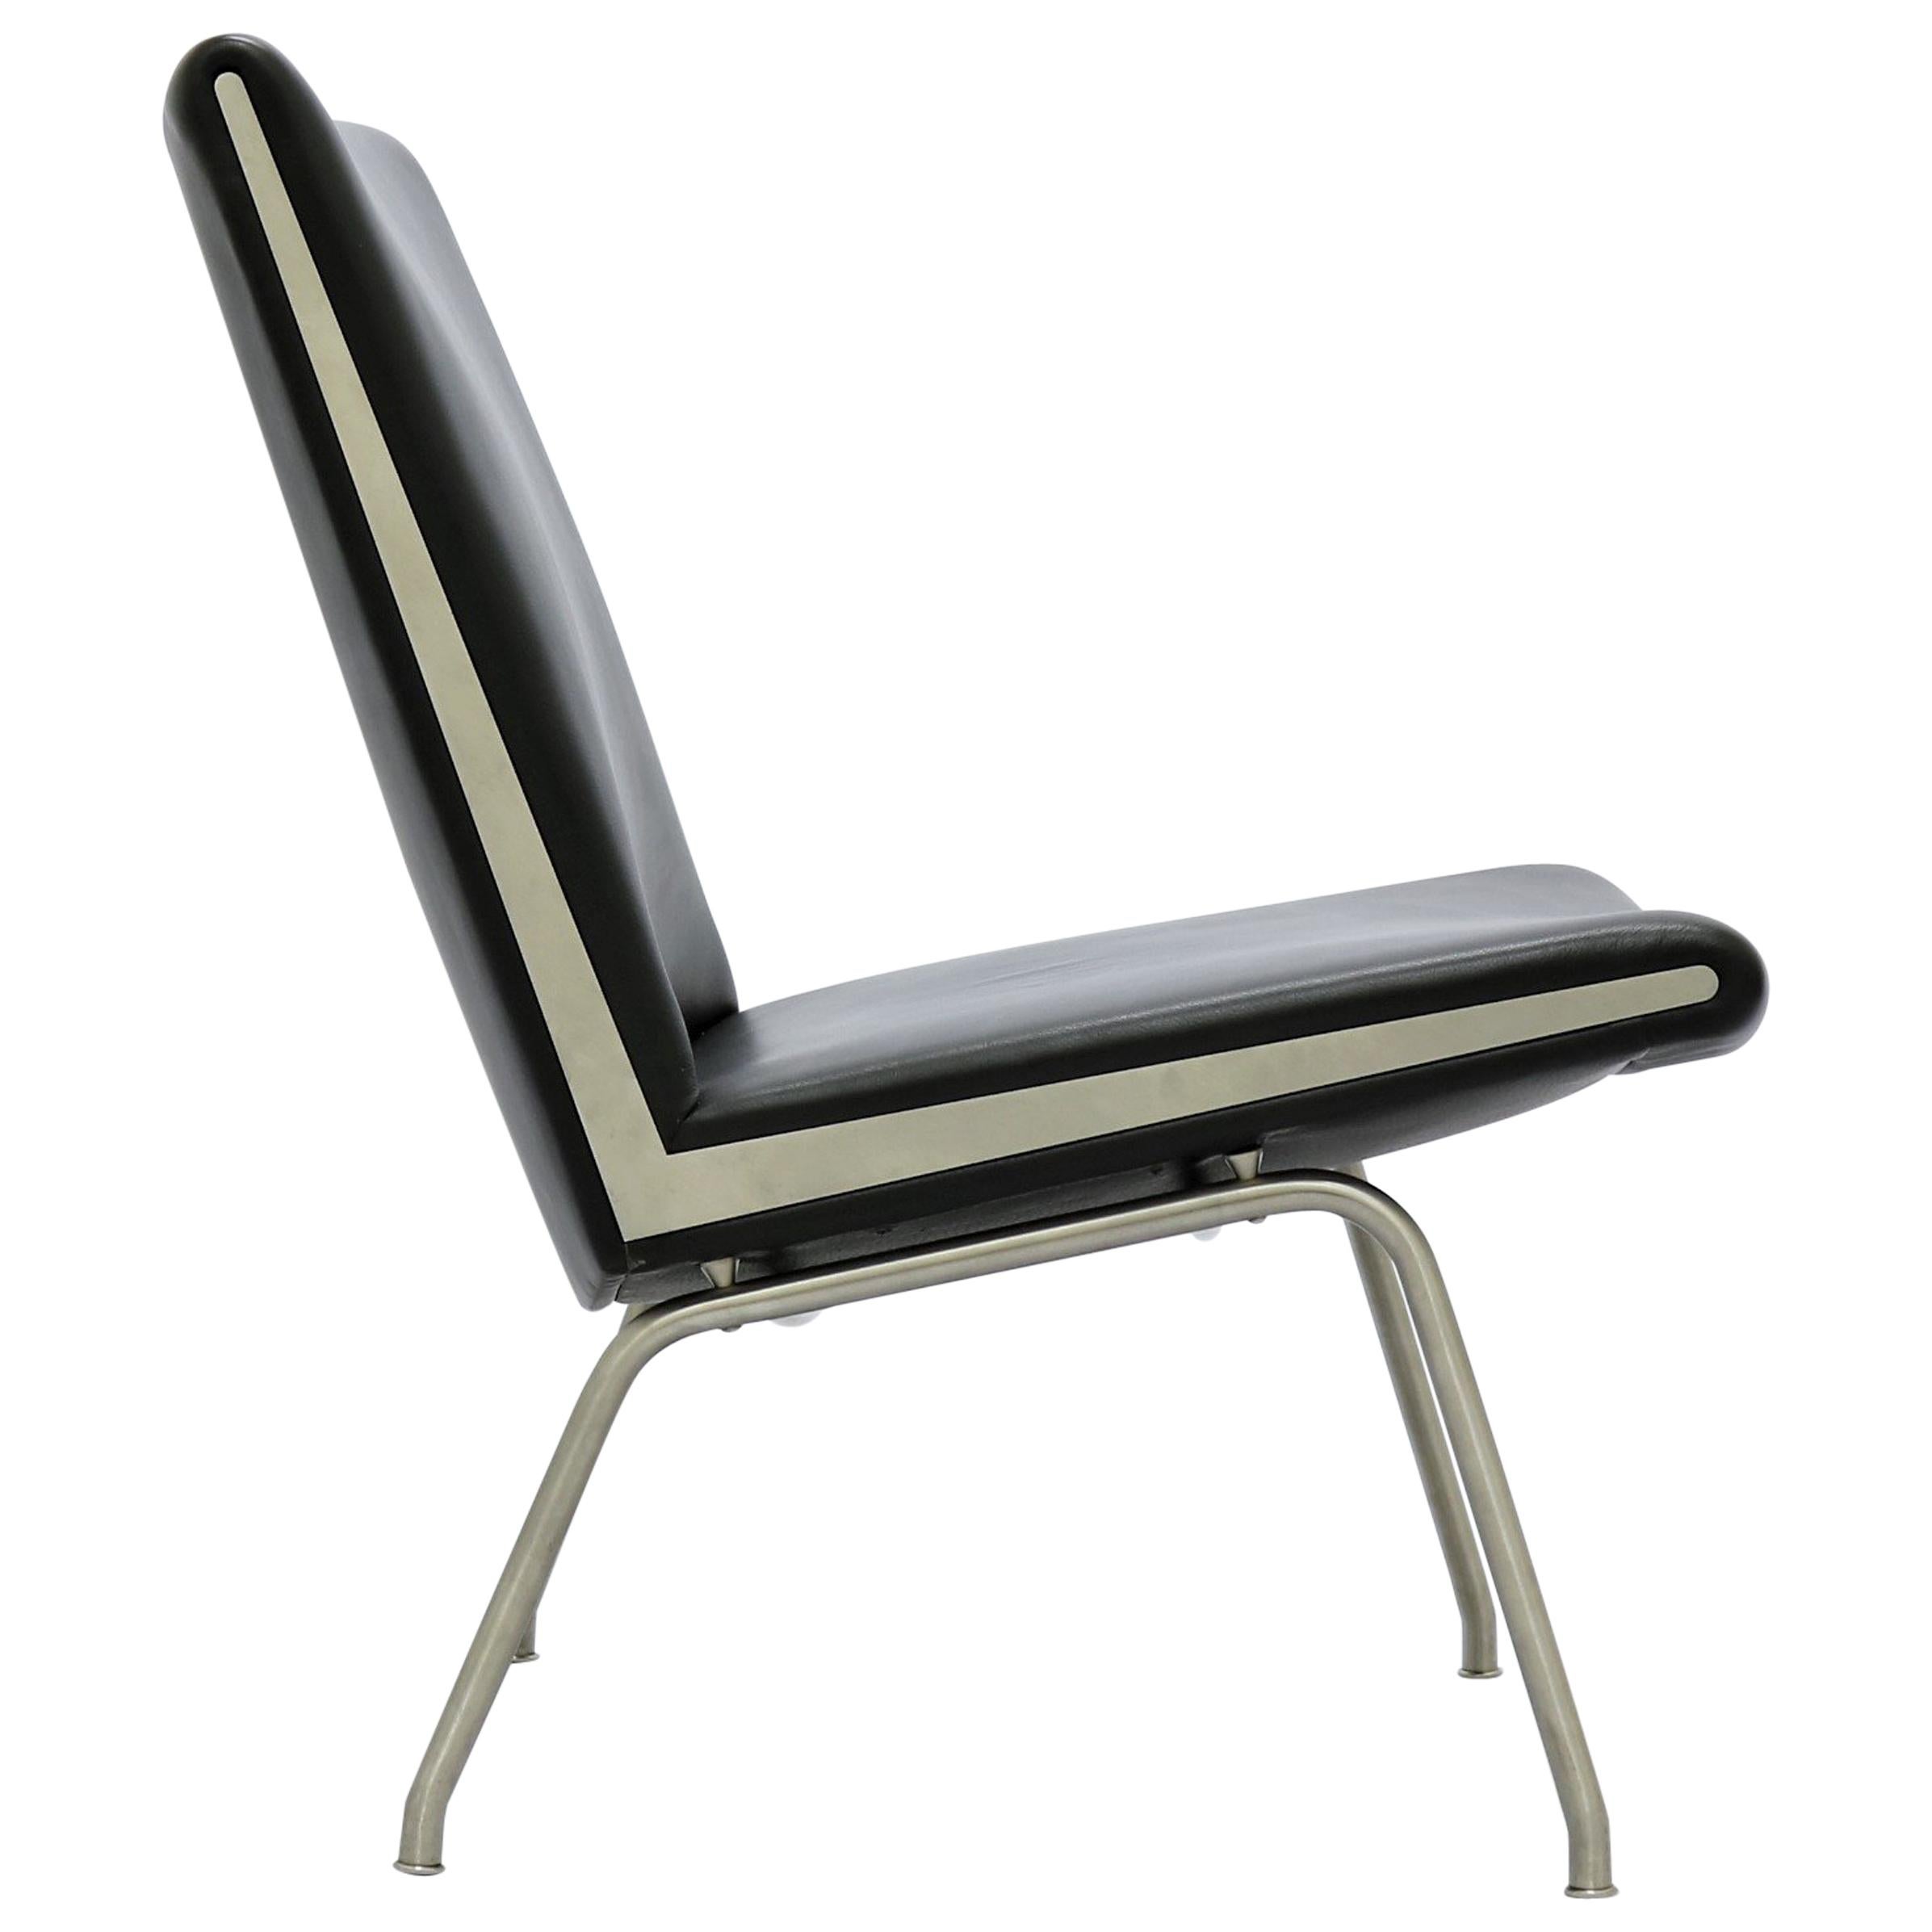 Hans J. Wegner "Airport" Lounge Chair in Black Leather and Steel